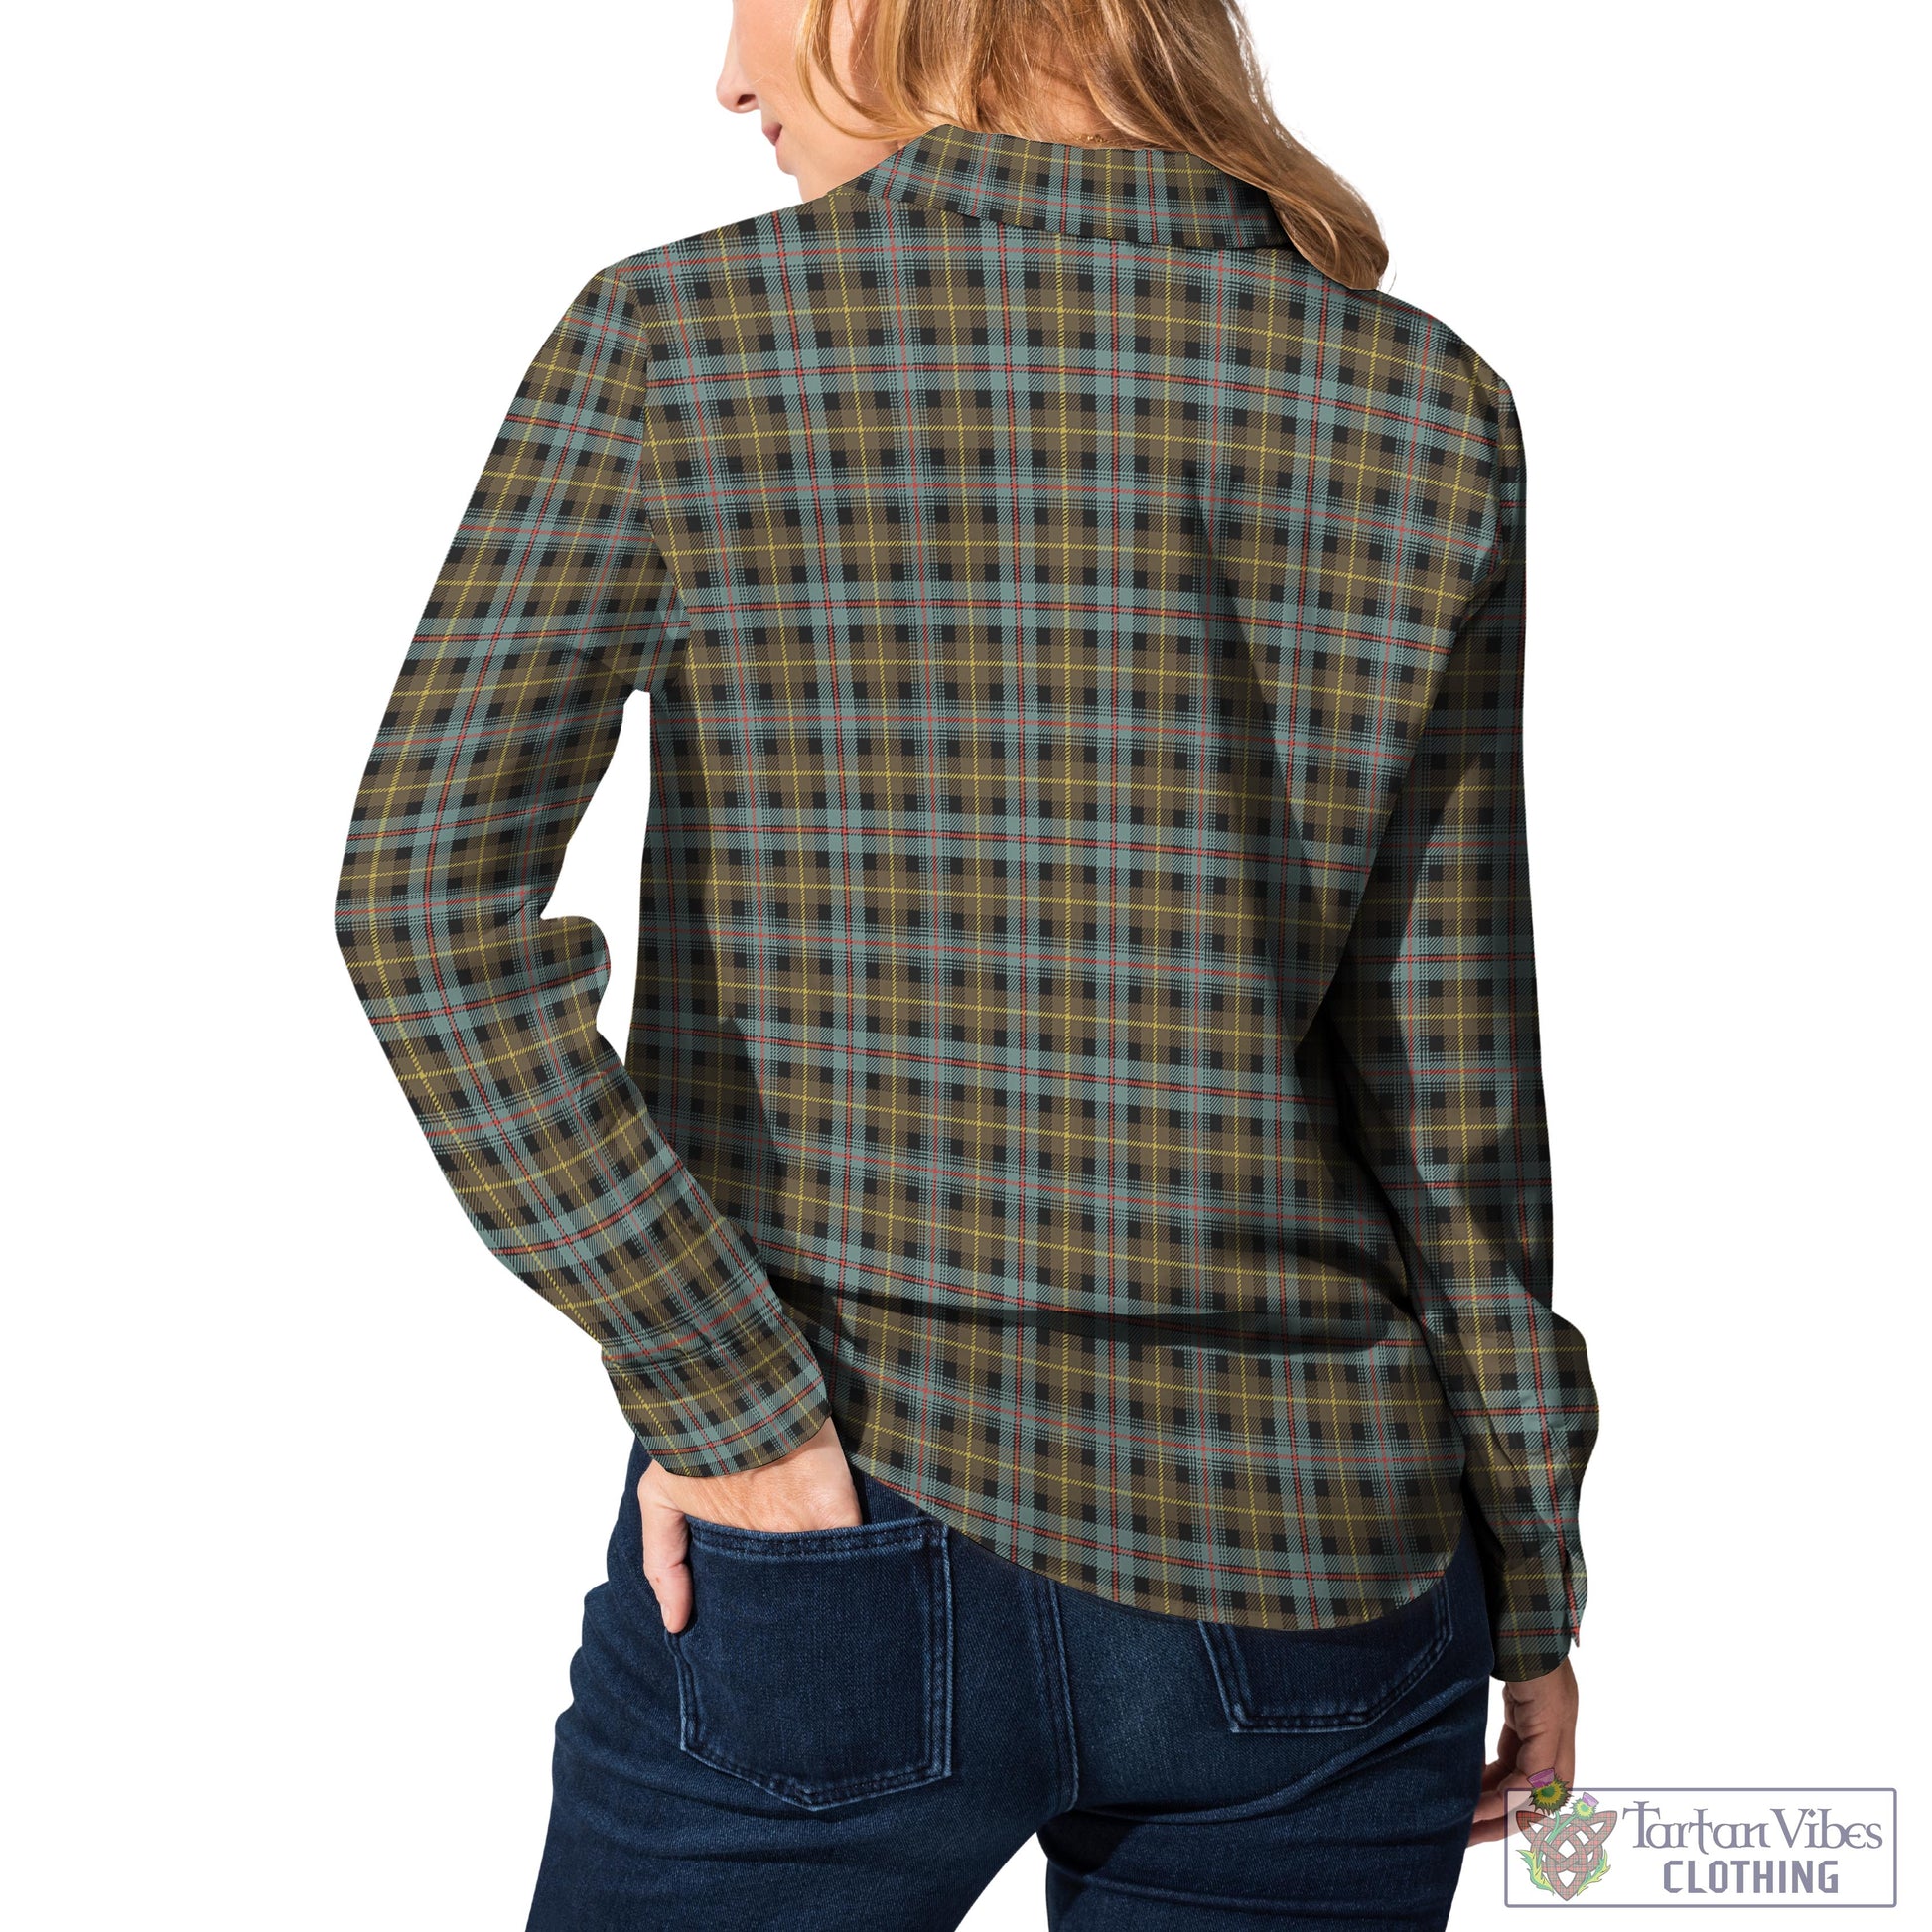 Tartan Vibes Clothing Farquharson Weathered Tartan Womens Casual Shirt with Family Crest